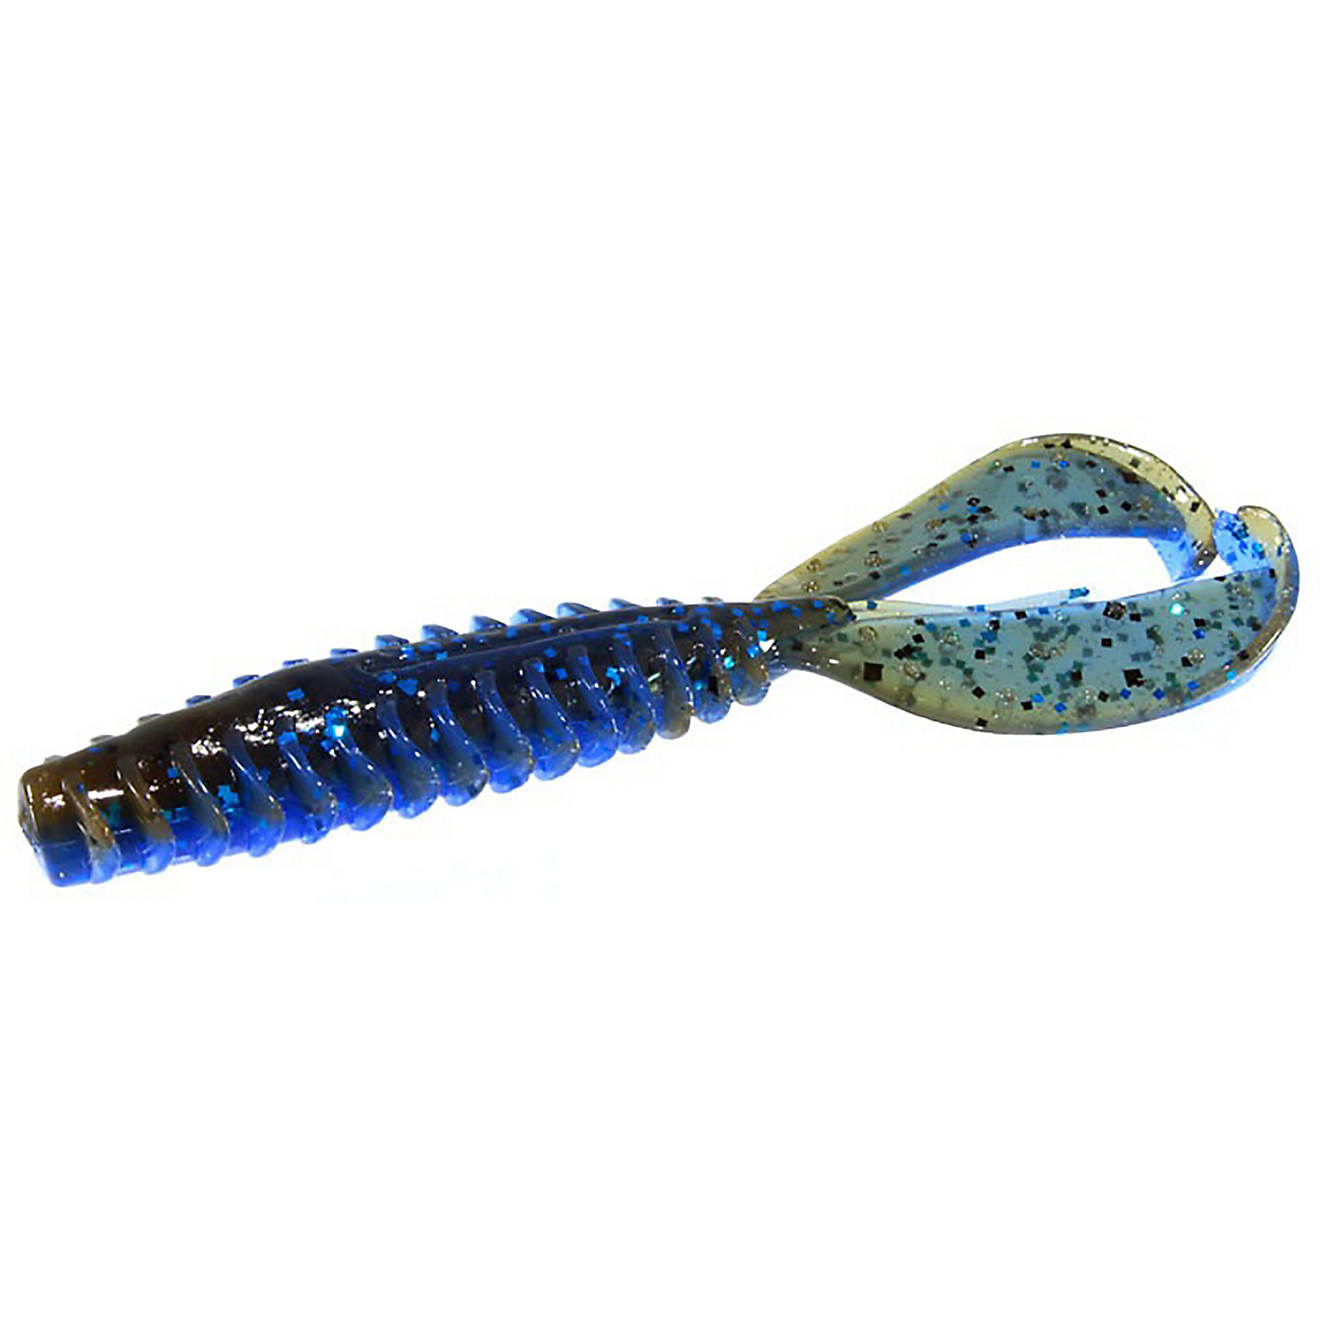 Zoom Z-Craw 4-1/2 in Soft Baits 6-Pack                                                                                           - view number 1